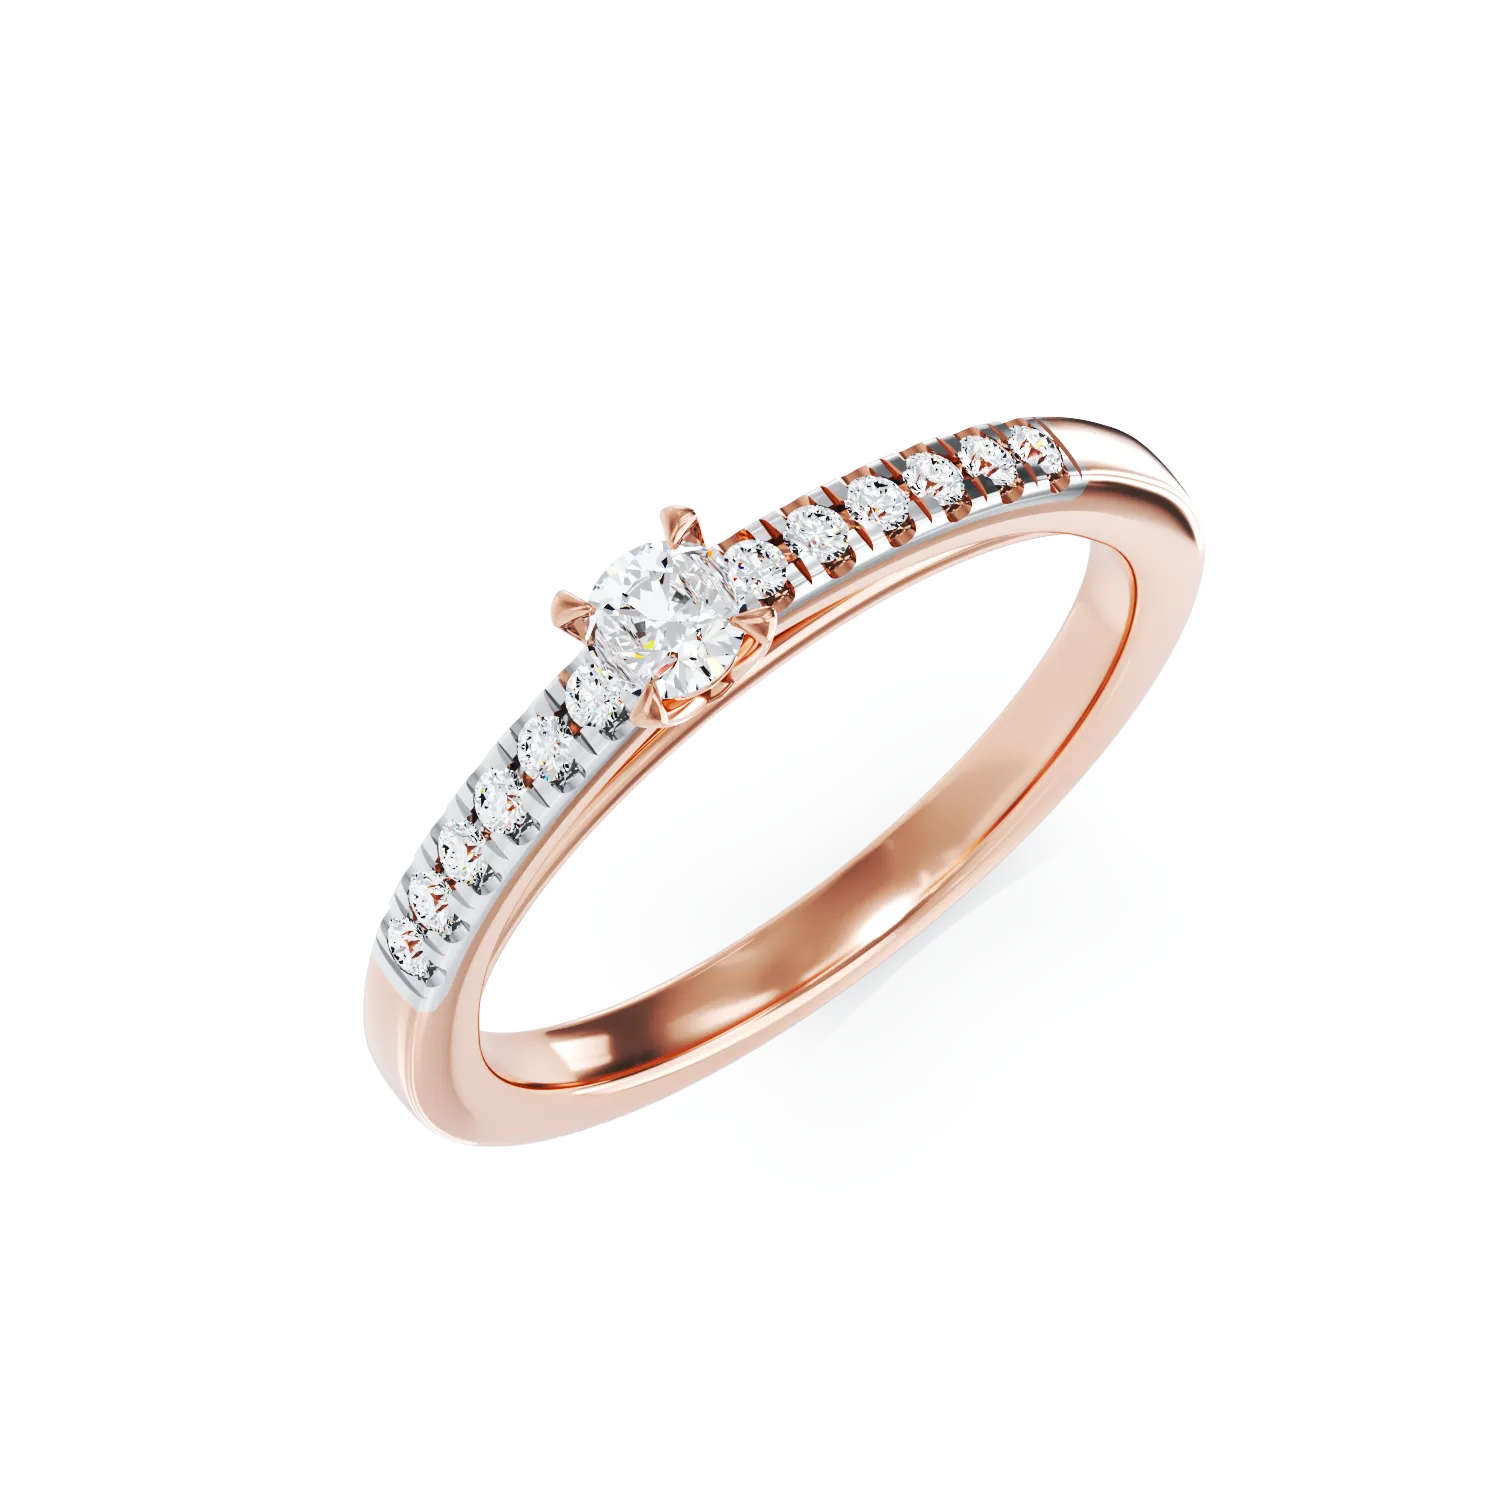 Rose gold engagement ring with 0.3ct diamonds